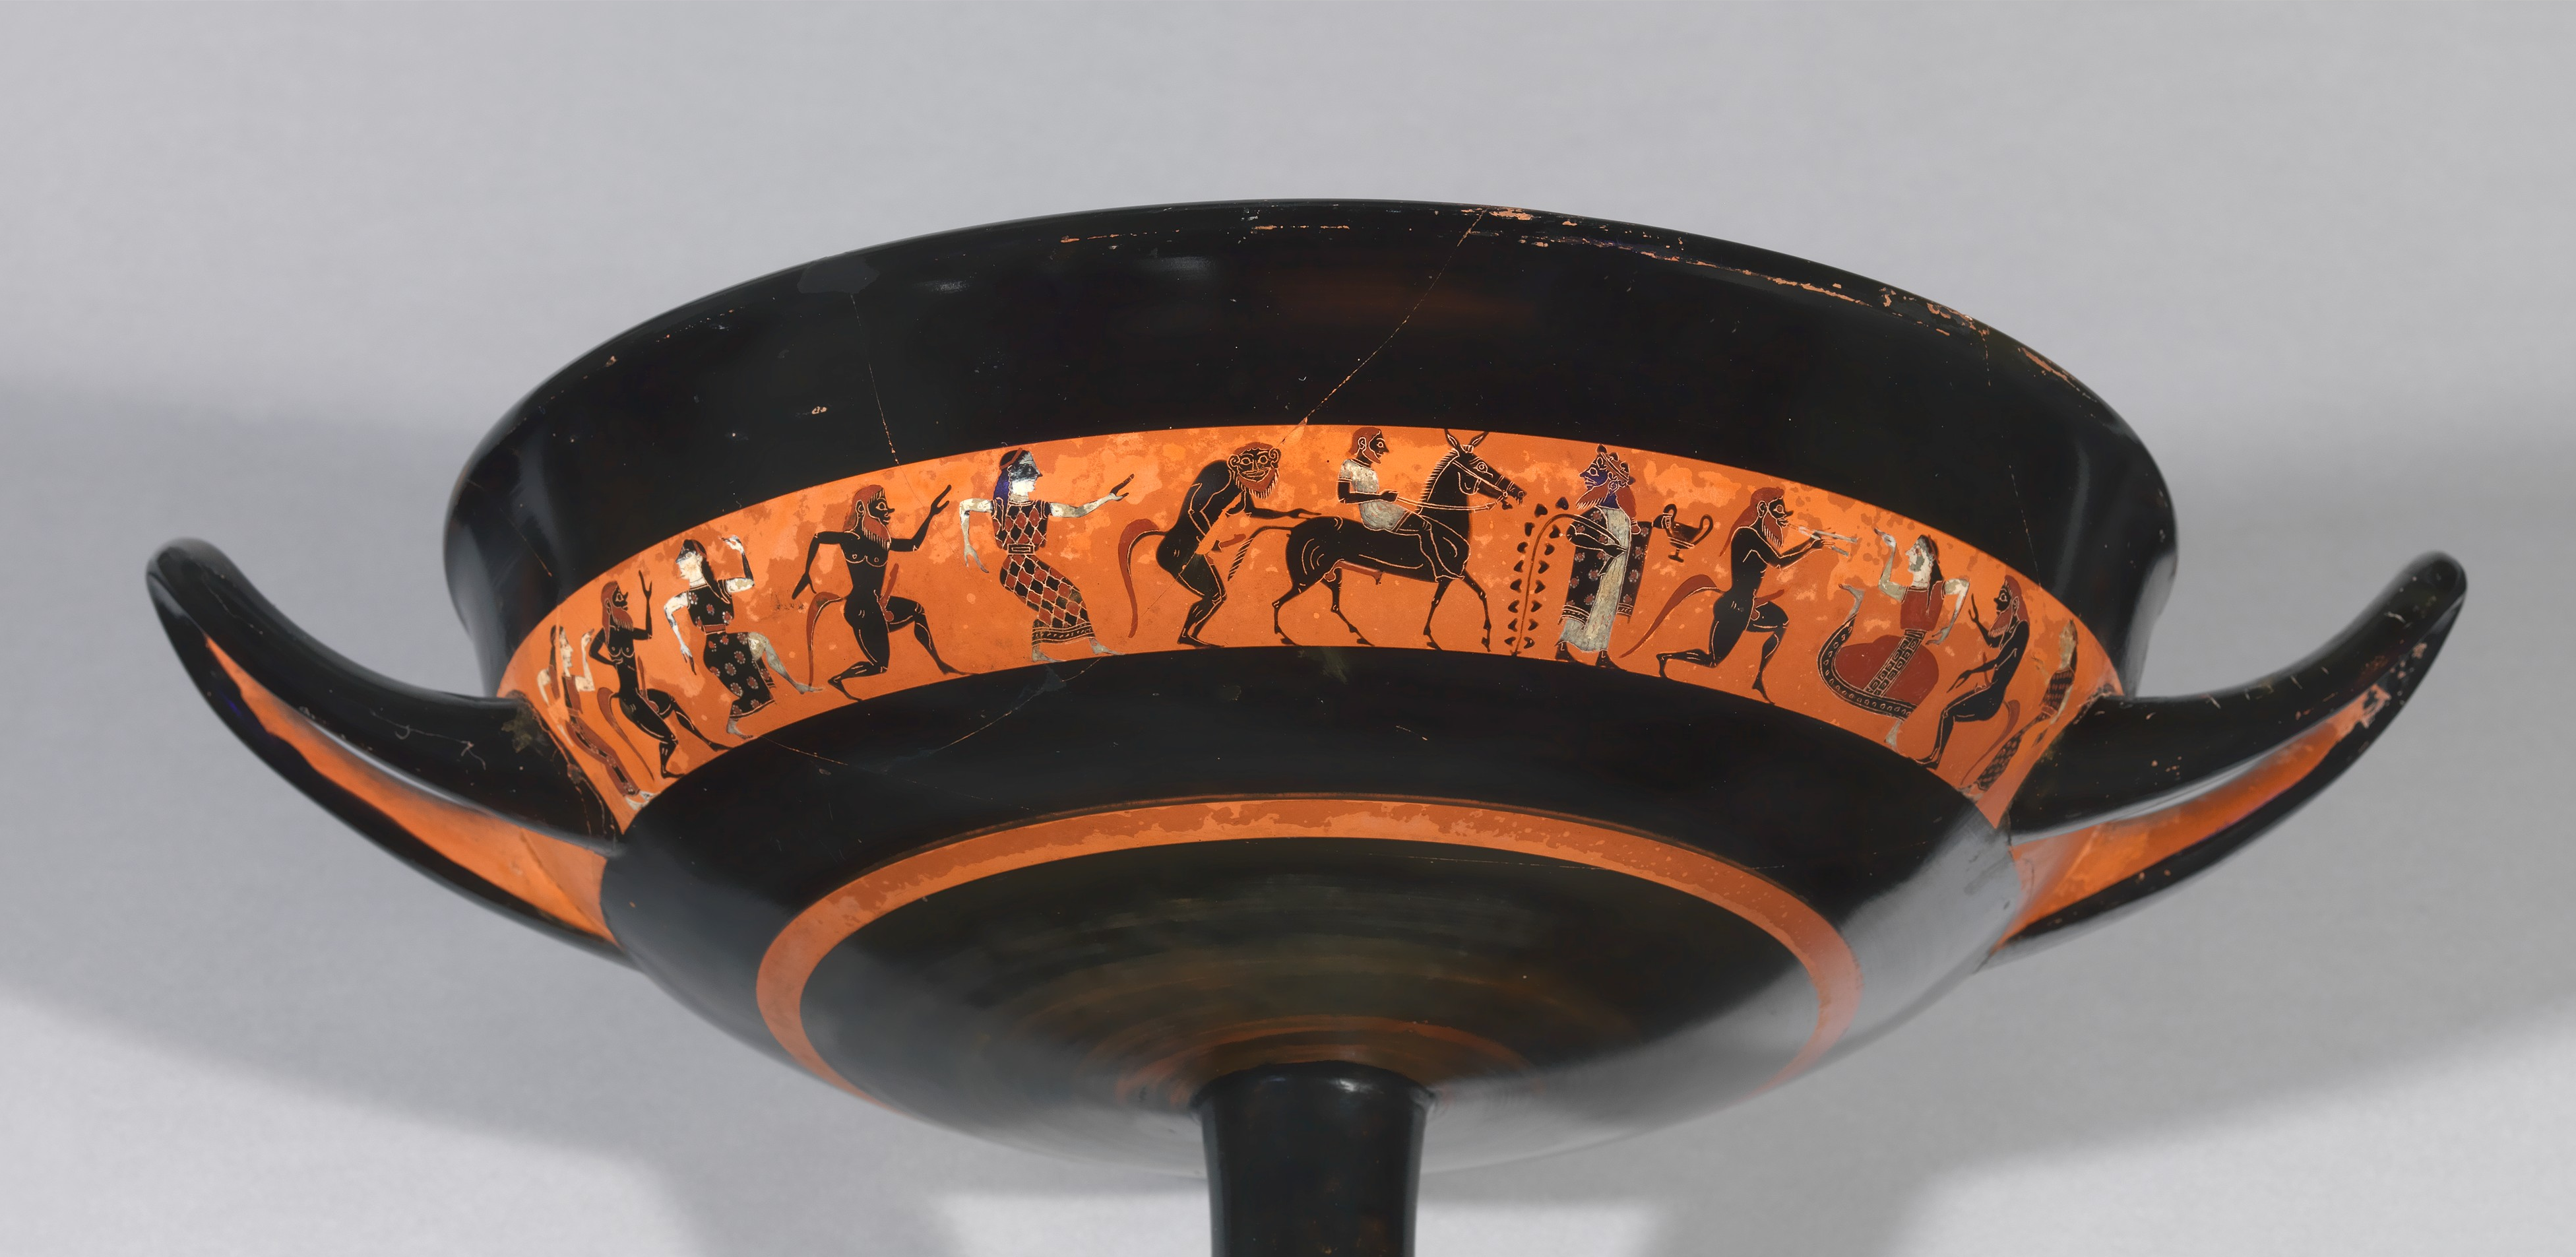 A procession of young maenad women and sileni. At the centre is Hephaestus, bearded, riding a mule, led by Dionysus, who holds a cup and grapevine.